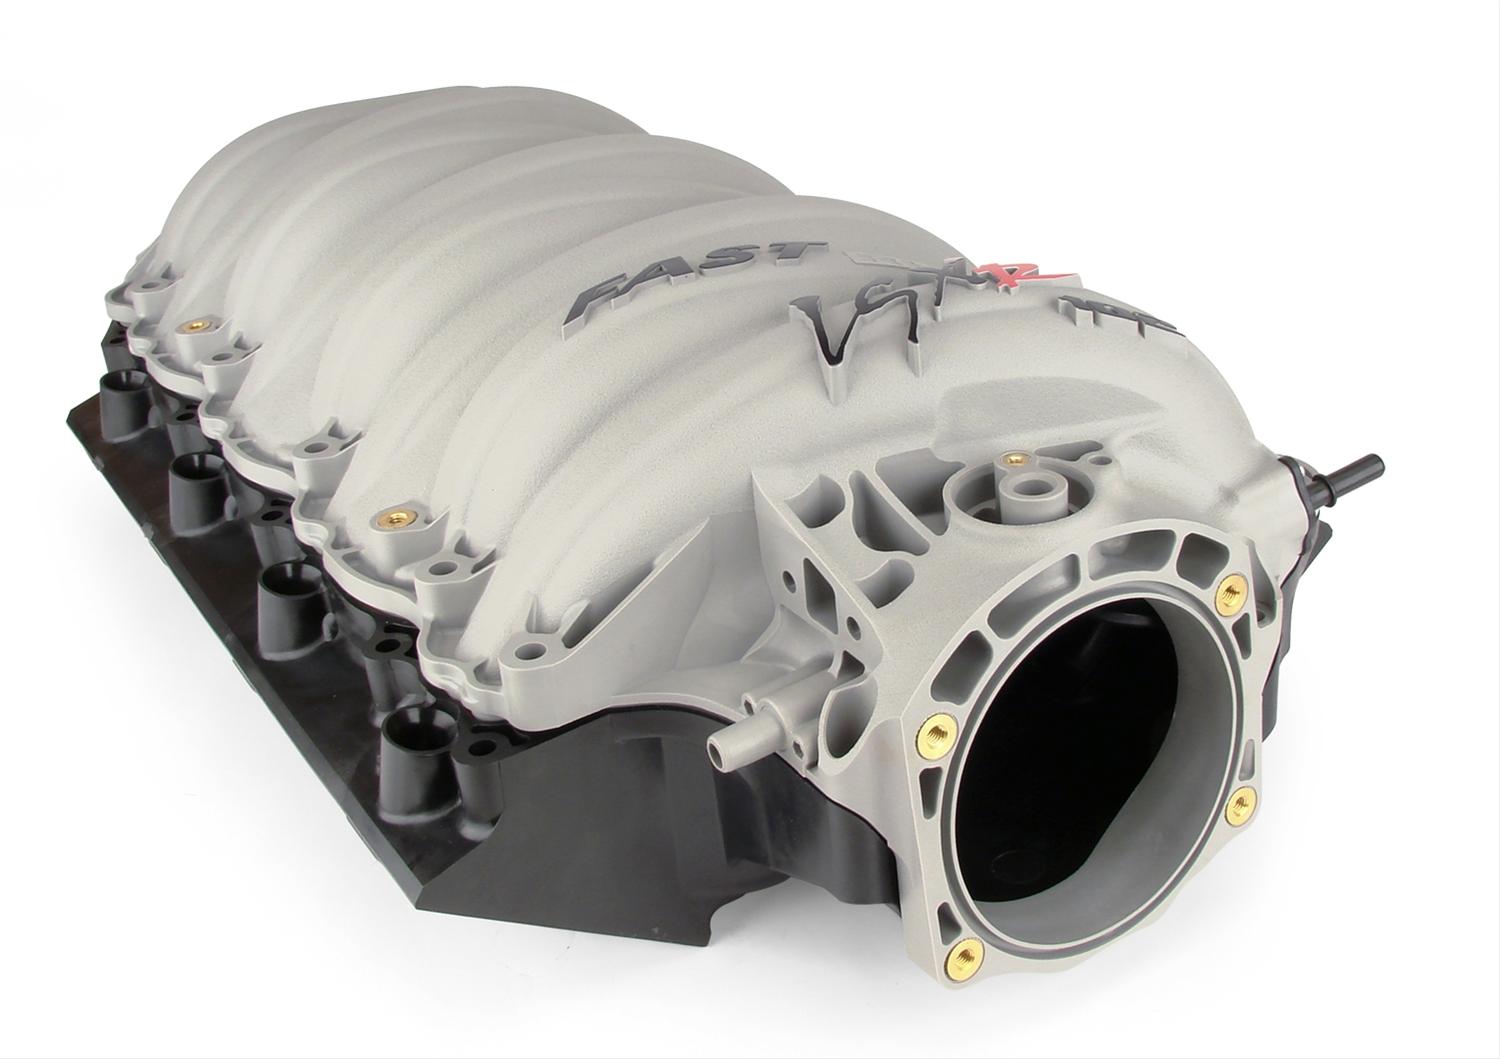 Free Shipping - FAST LSXR Intake Manifolds with qualifying orders of $99. 